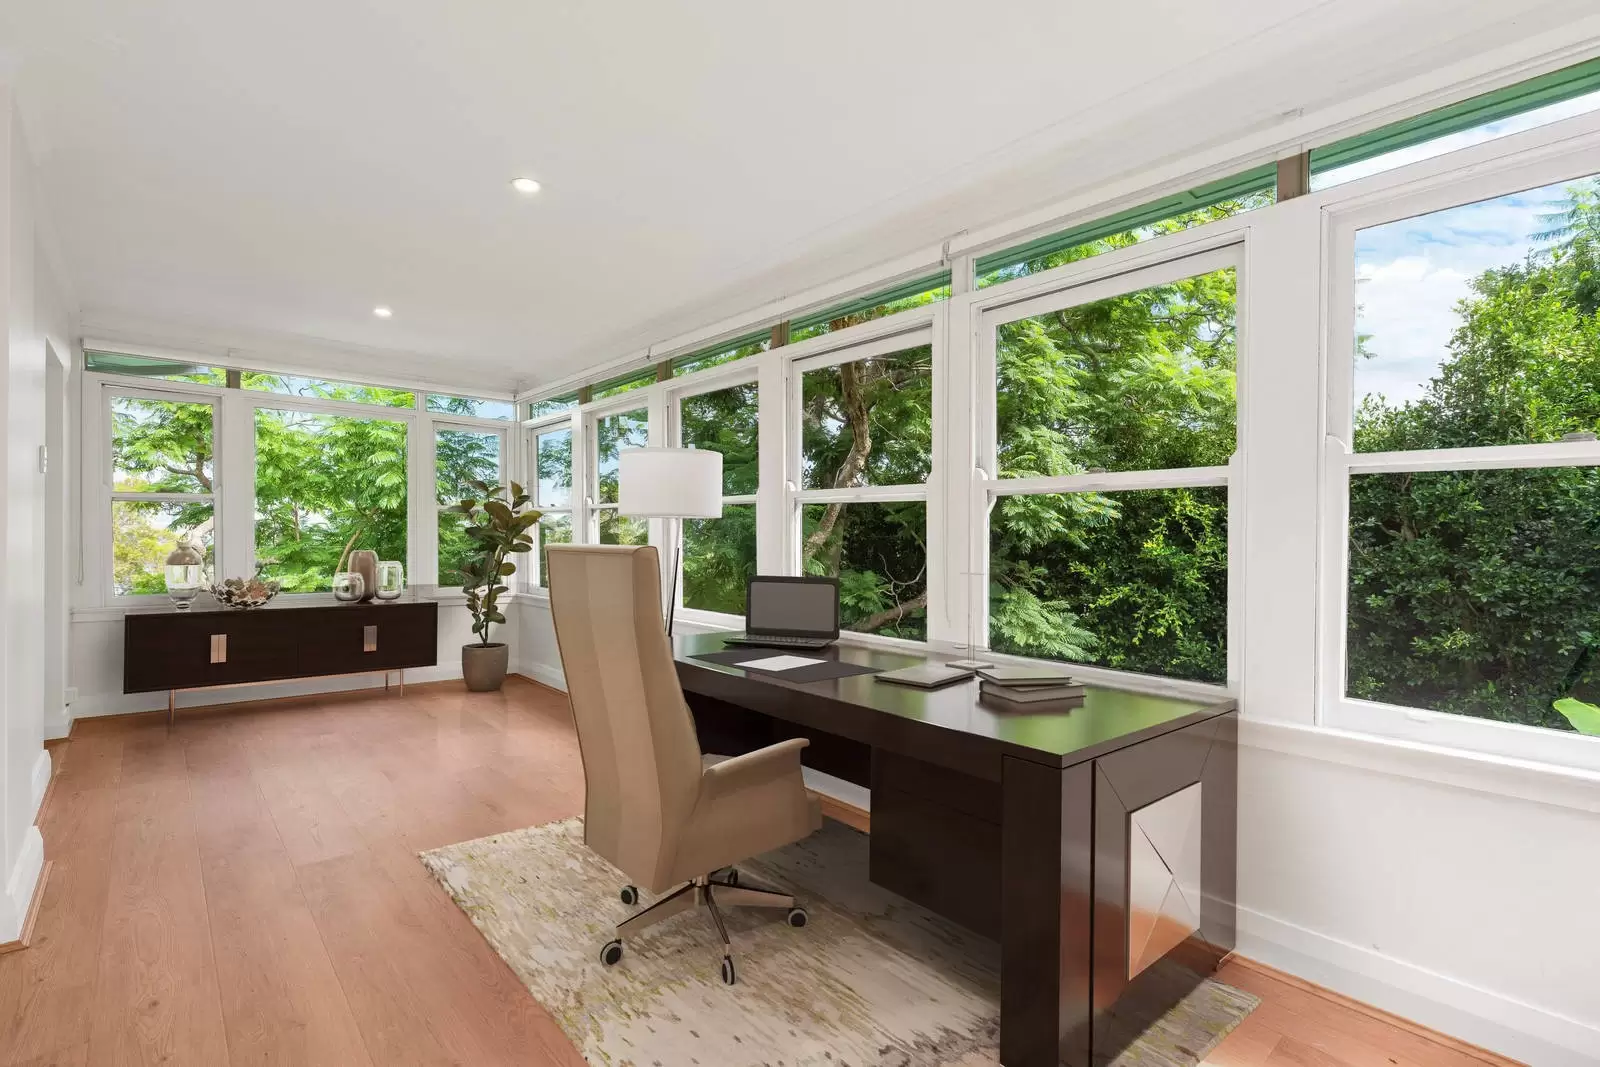 41 Vaucluse Road, Vaucluse Leased by Sydney Sotheby's International Realty - image 8